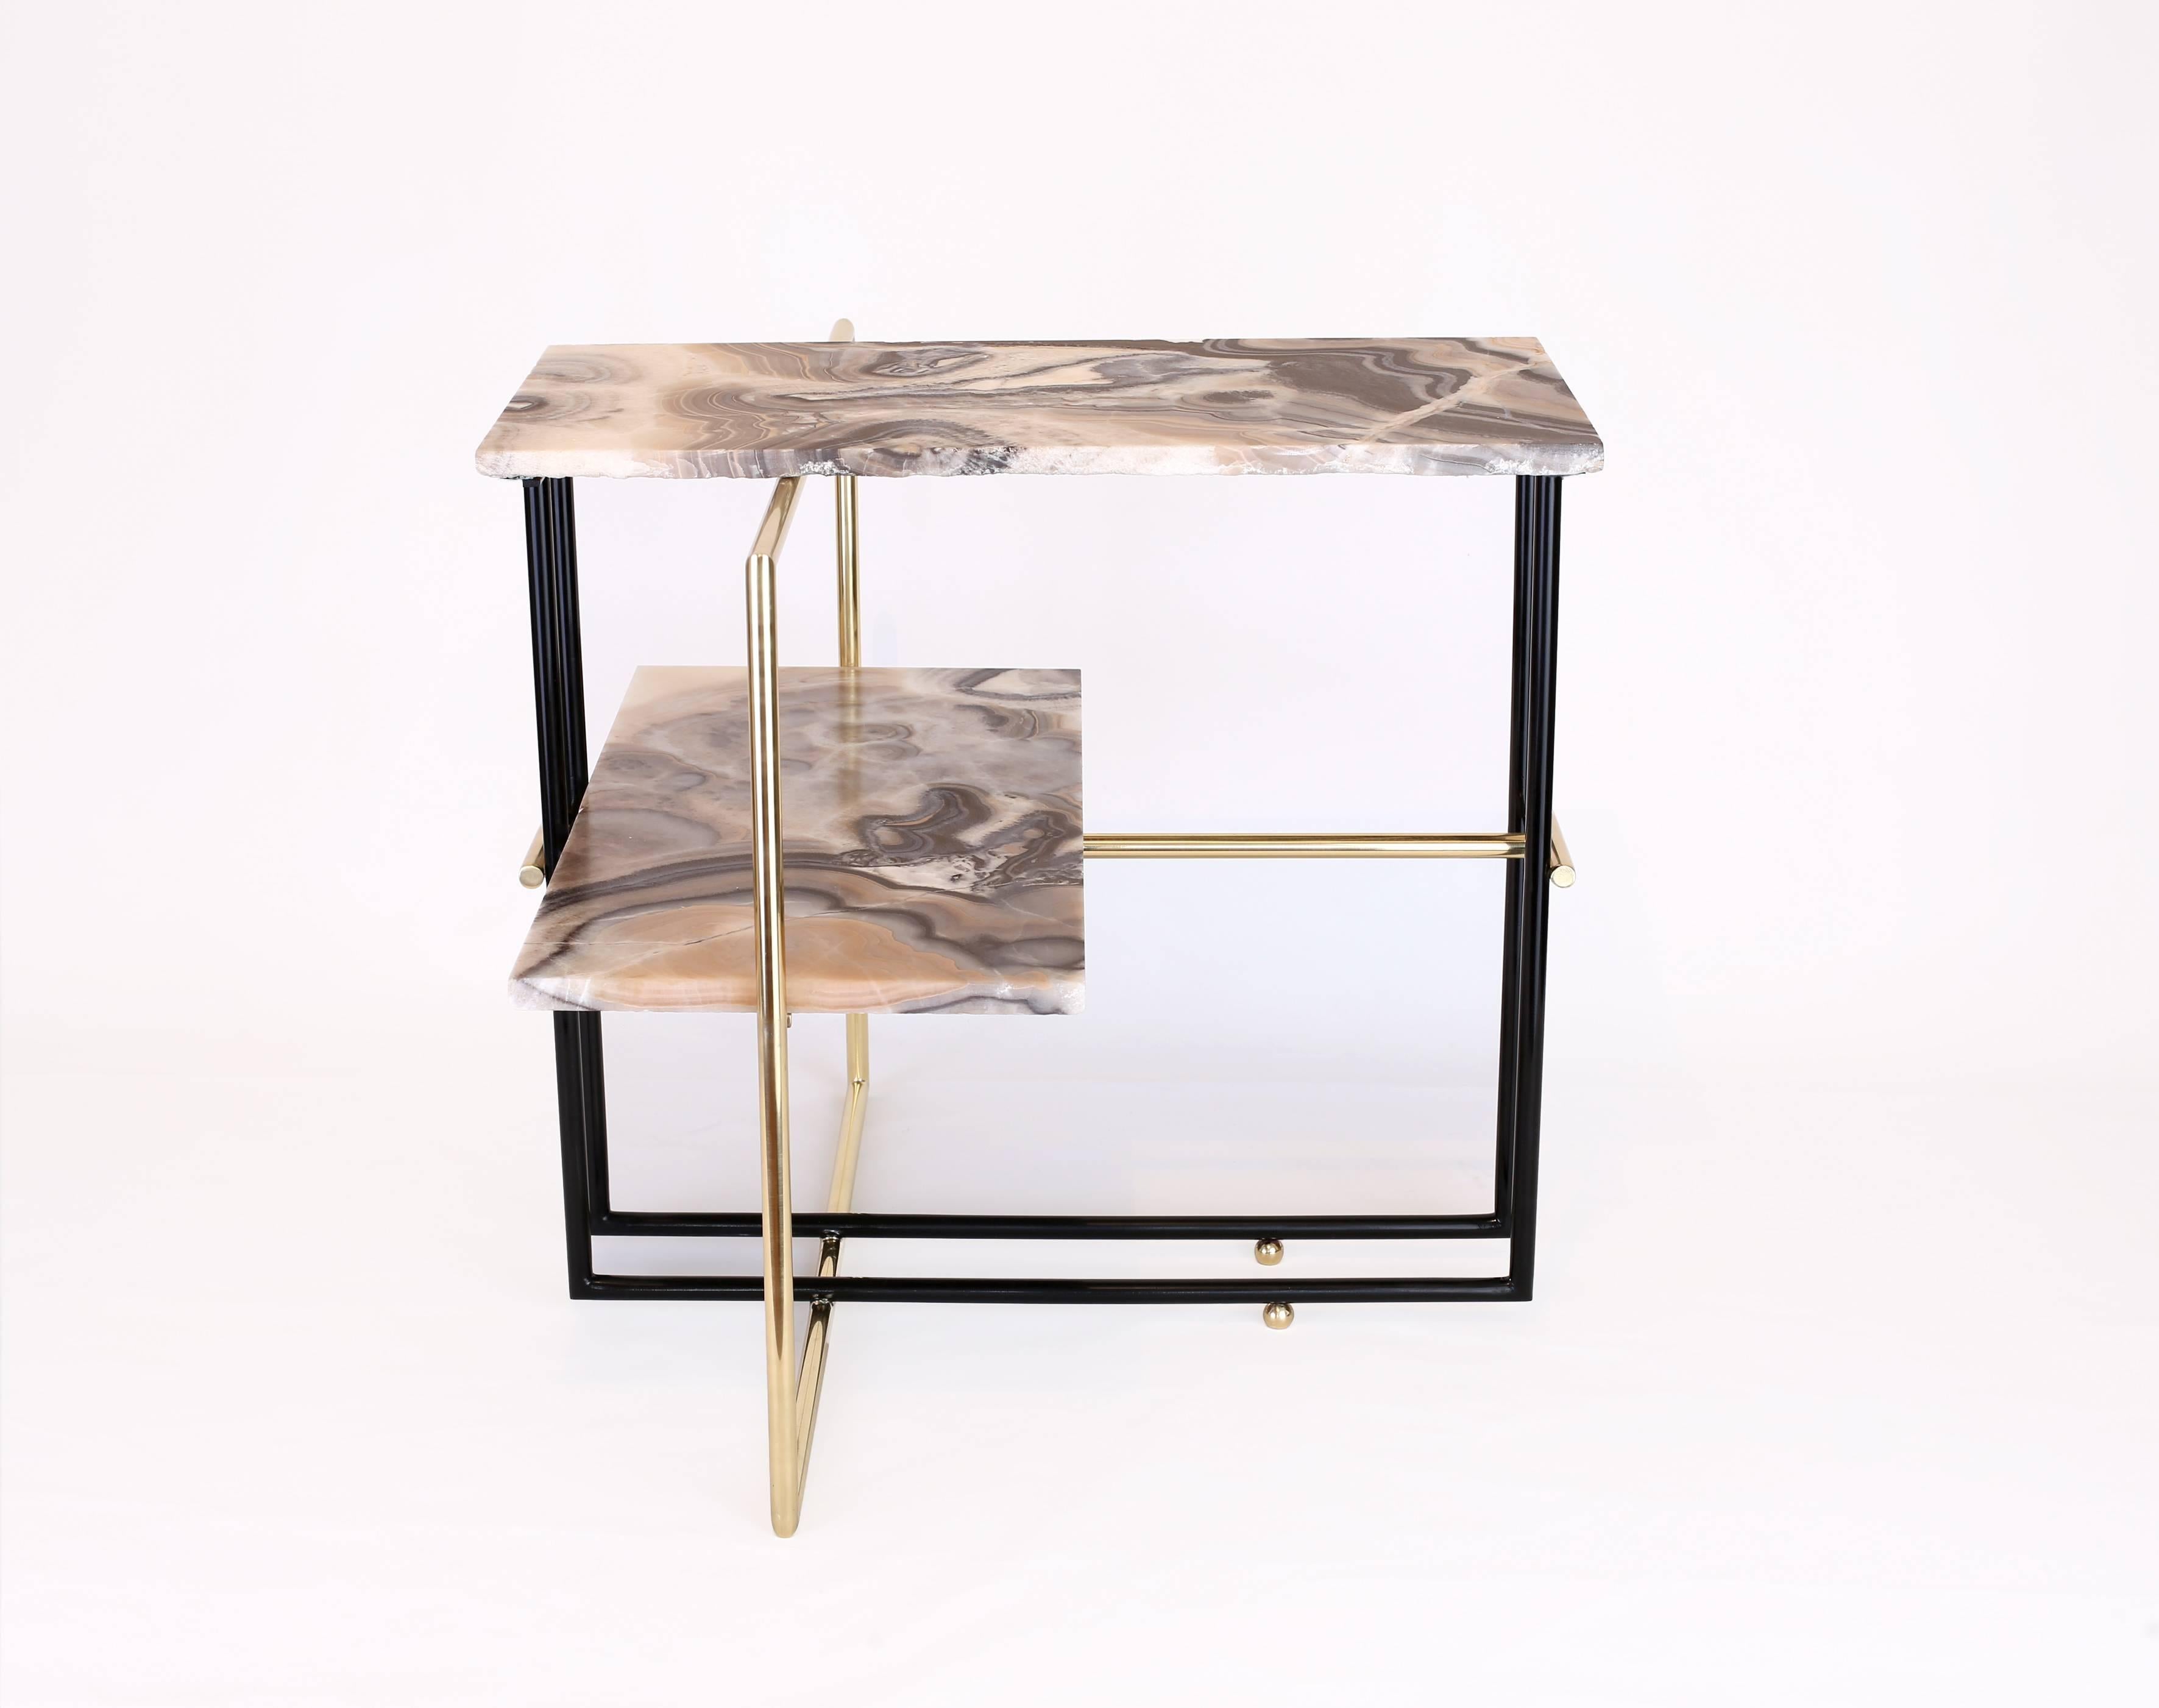 Contemporary Mexican Onyx Stone and Brass UÑA Side Coffee Table Design by Nomade Atelier For Sale